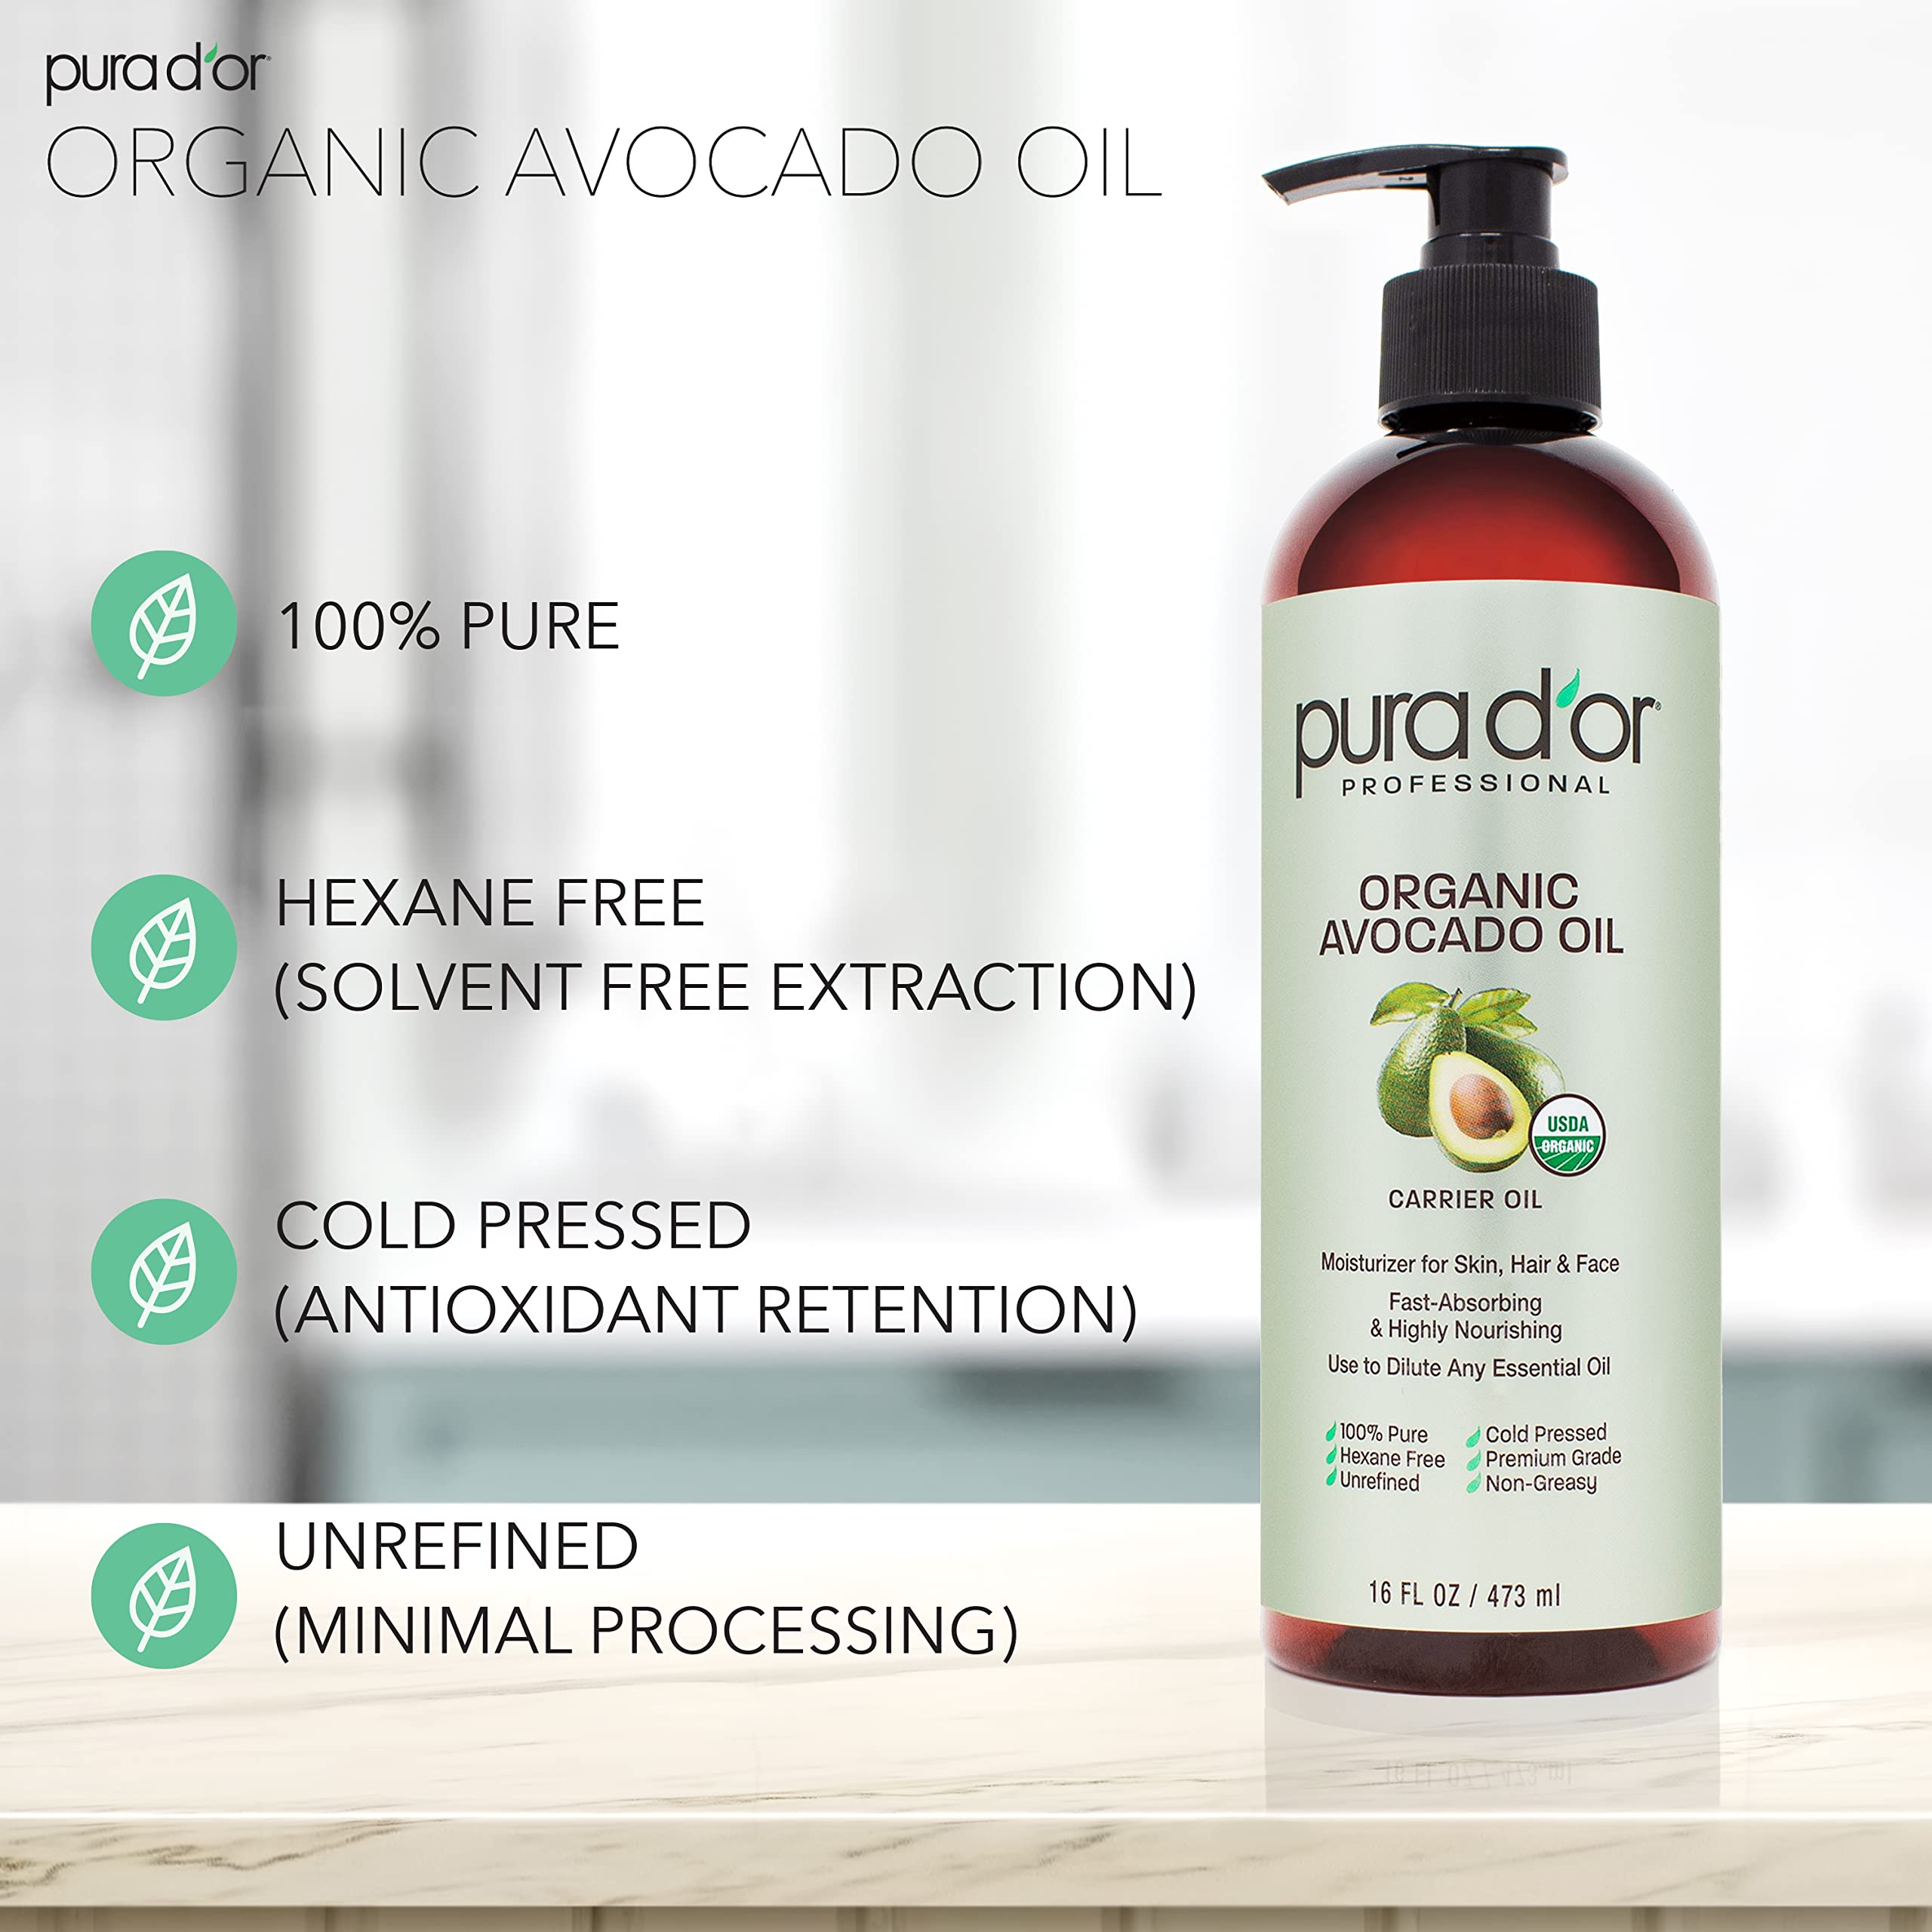 PURA D'OR Organic Avocado Oil, 100% Pure USDA Certified Natural, Cold Pressed Carrier Oil, Nutrients & Antioxidants, Hydrating & Nourishing for Full Body Massage, Hair, Skin & Face, 16oz